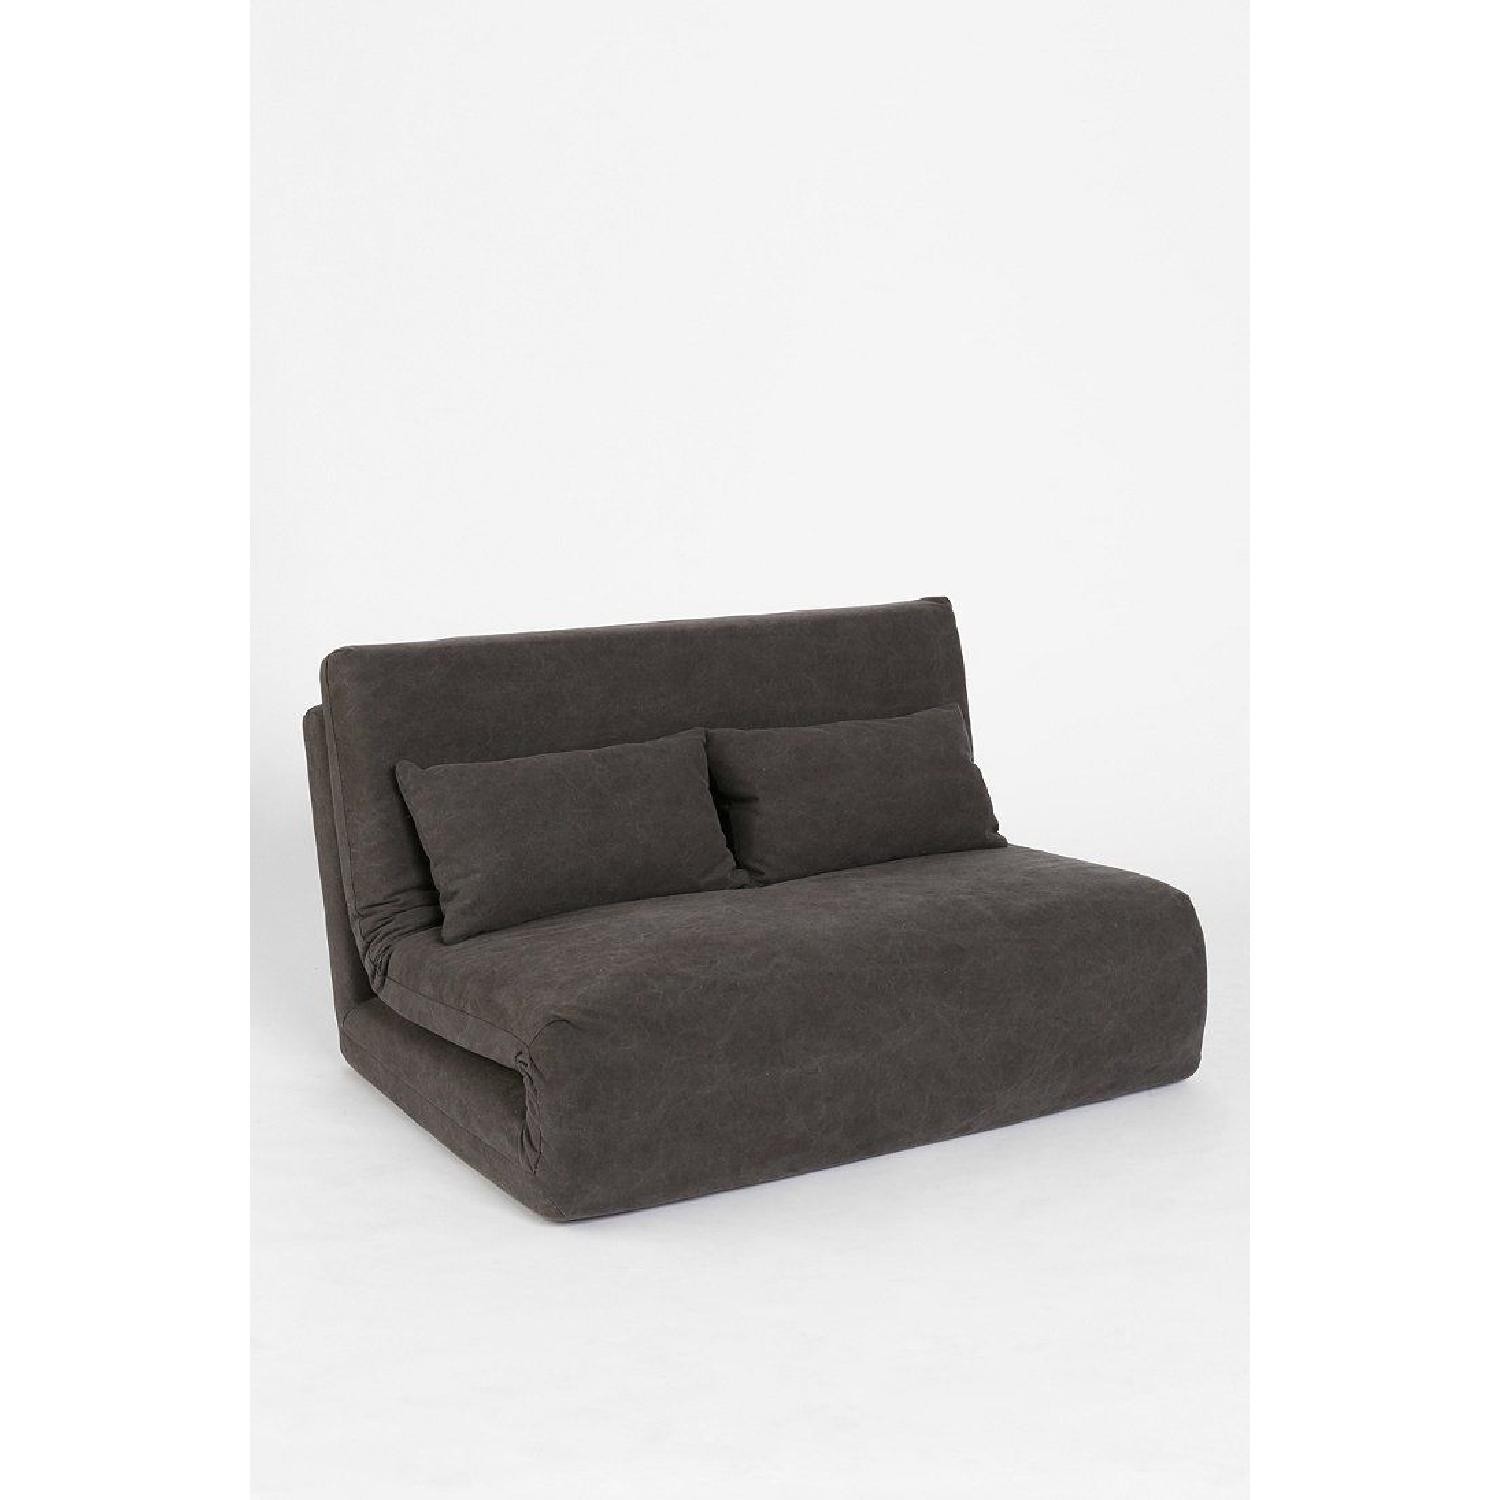 toddler size pull out couches